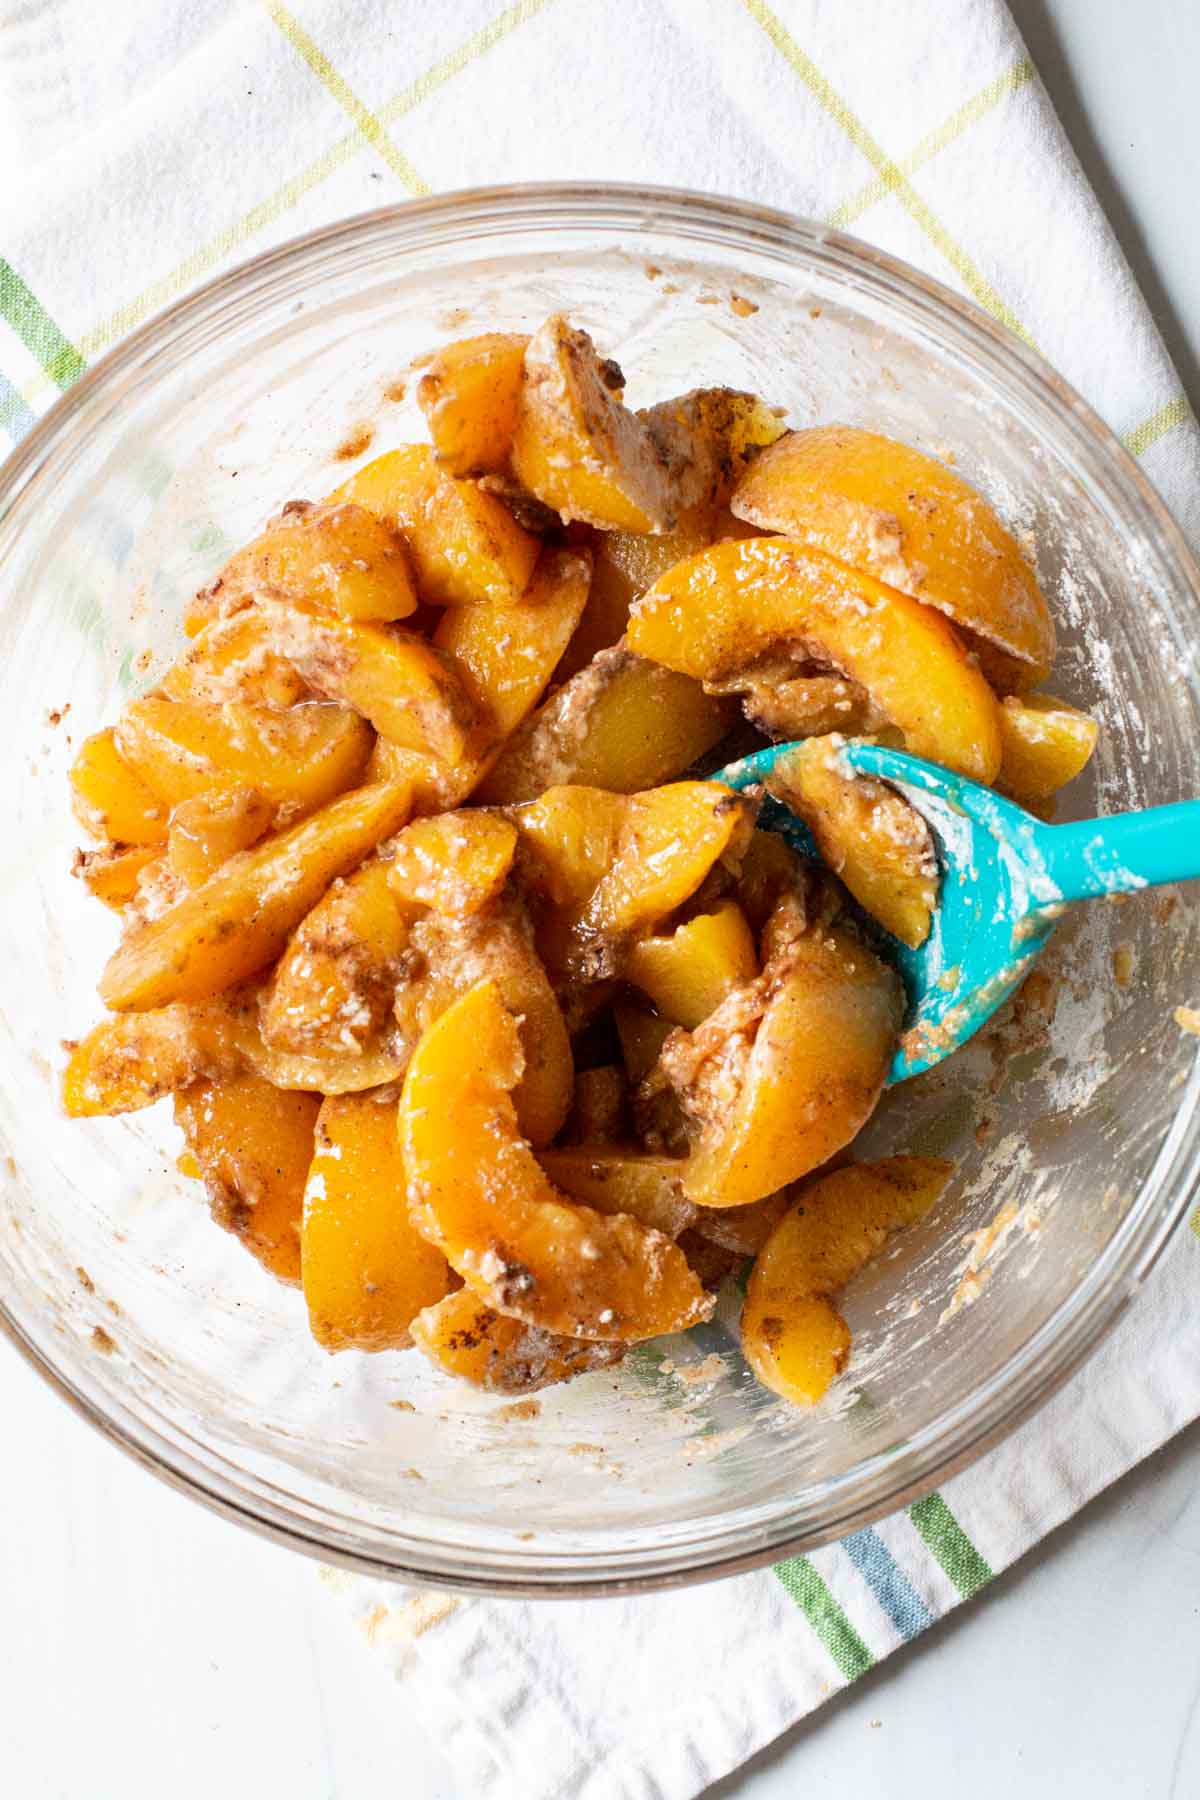 Peach pie filling using canned peaches.